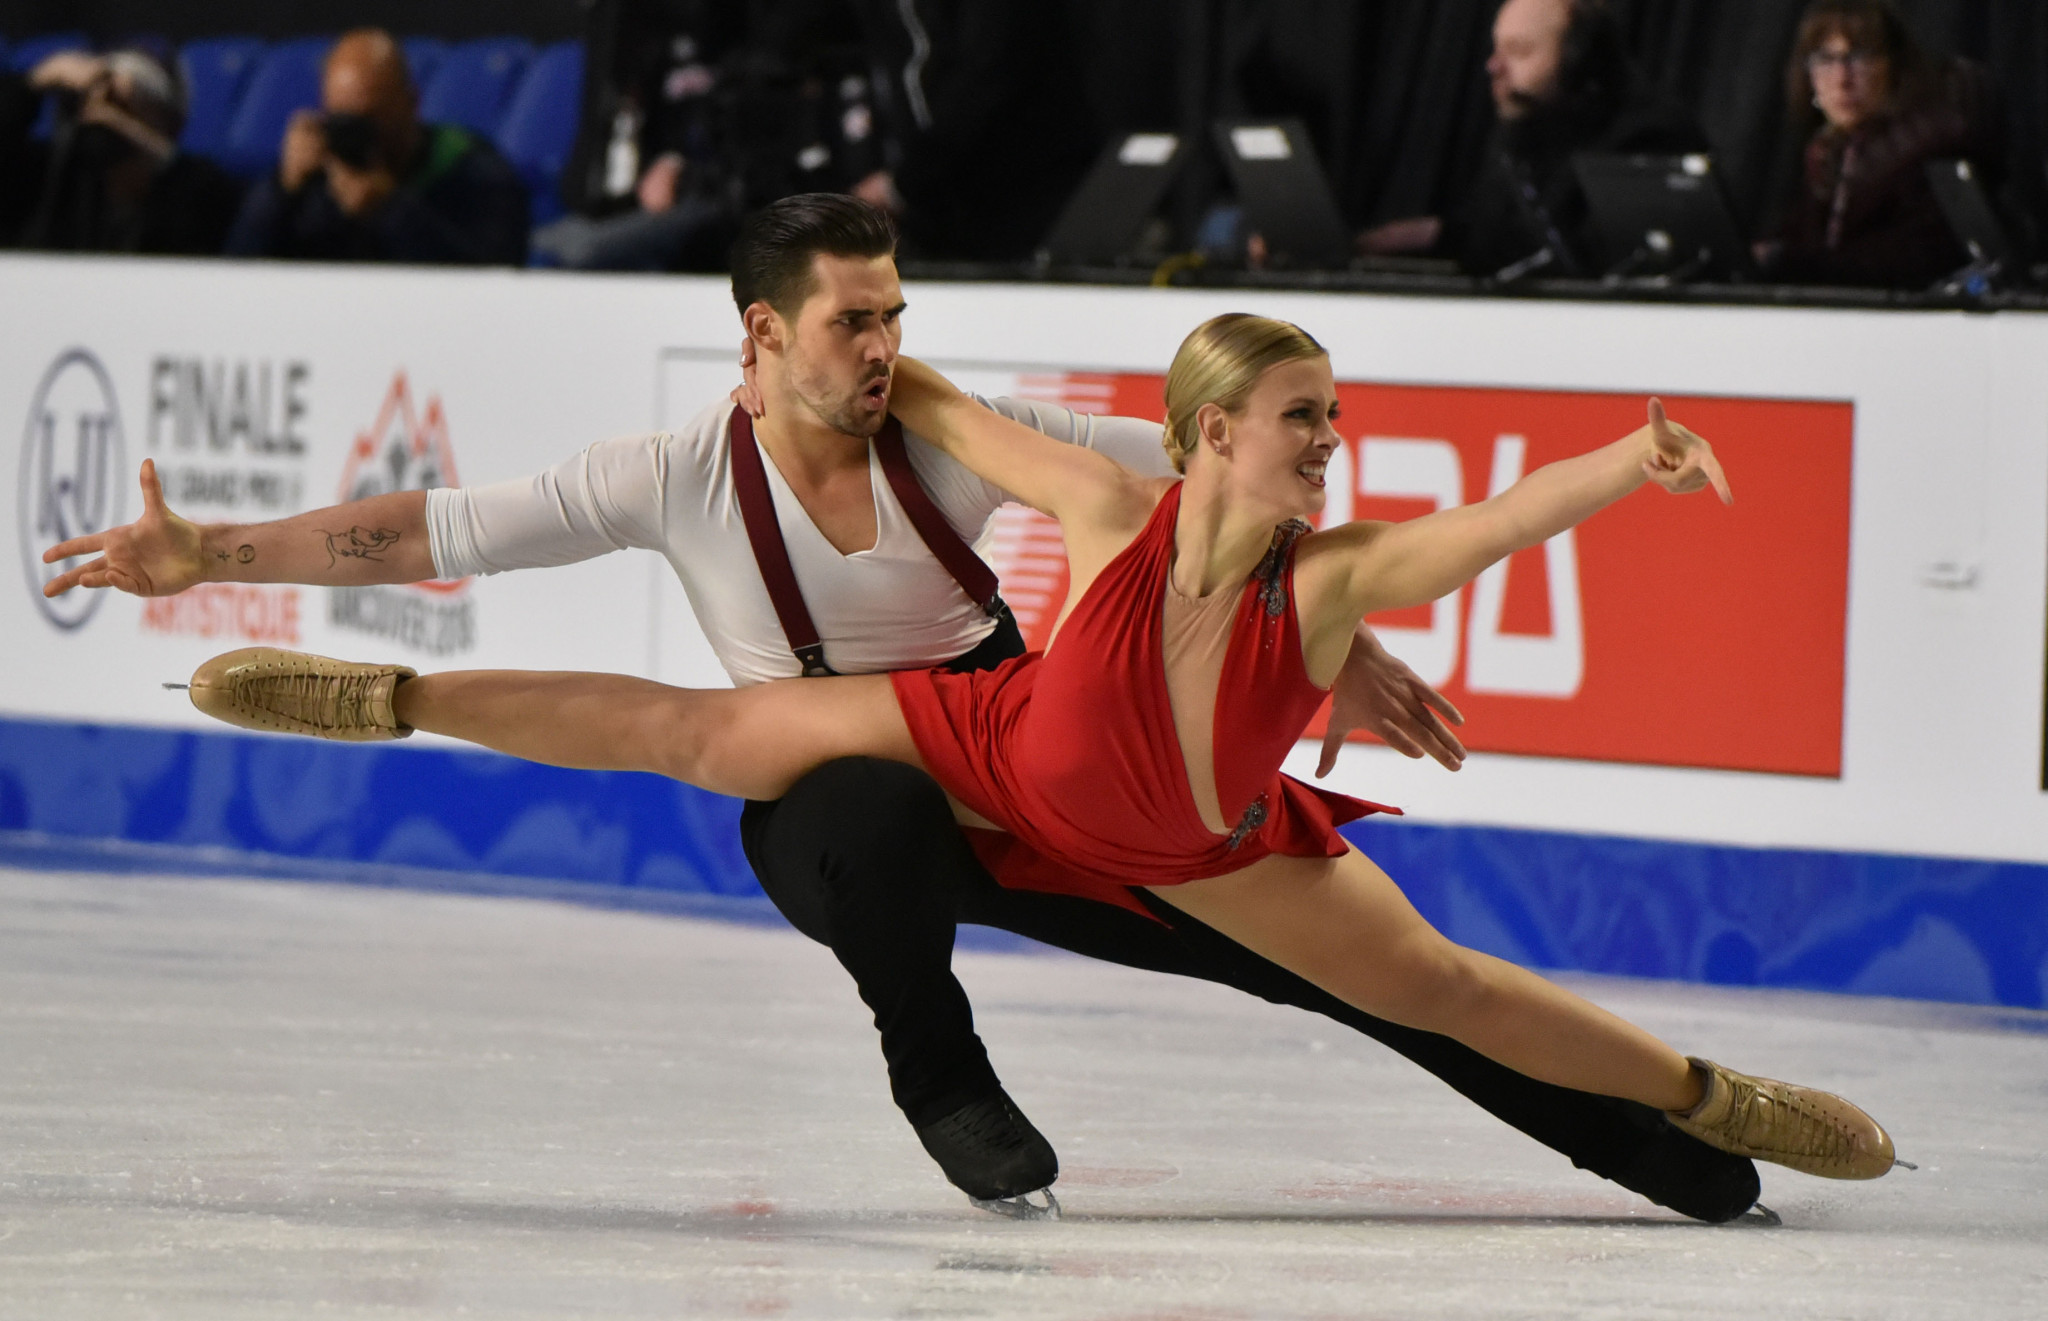 Dates and locations for the next two seasons of the Grand Prix of Figure Skating circuit have been announced by the International Skating Union ©Getty Images